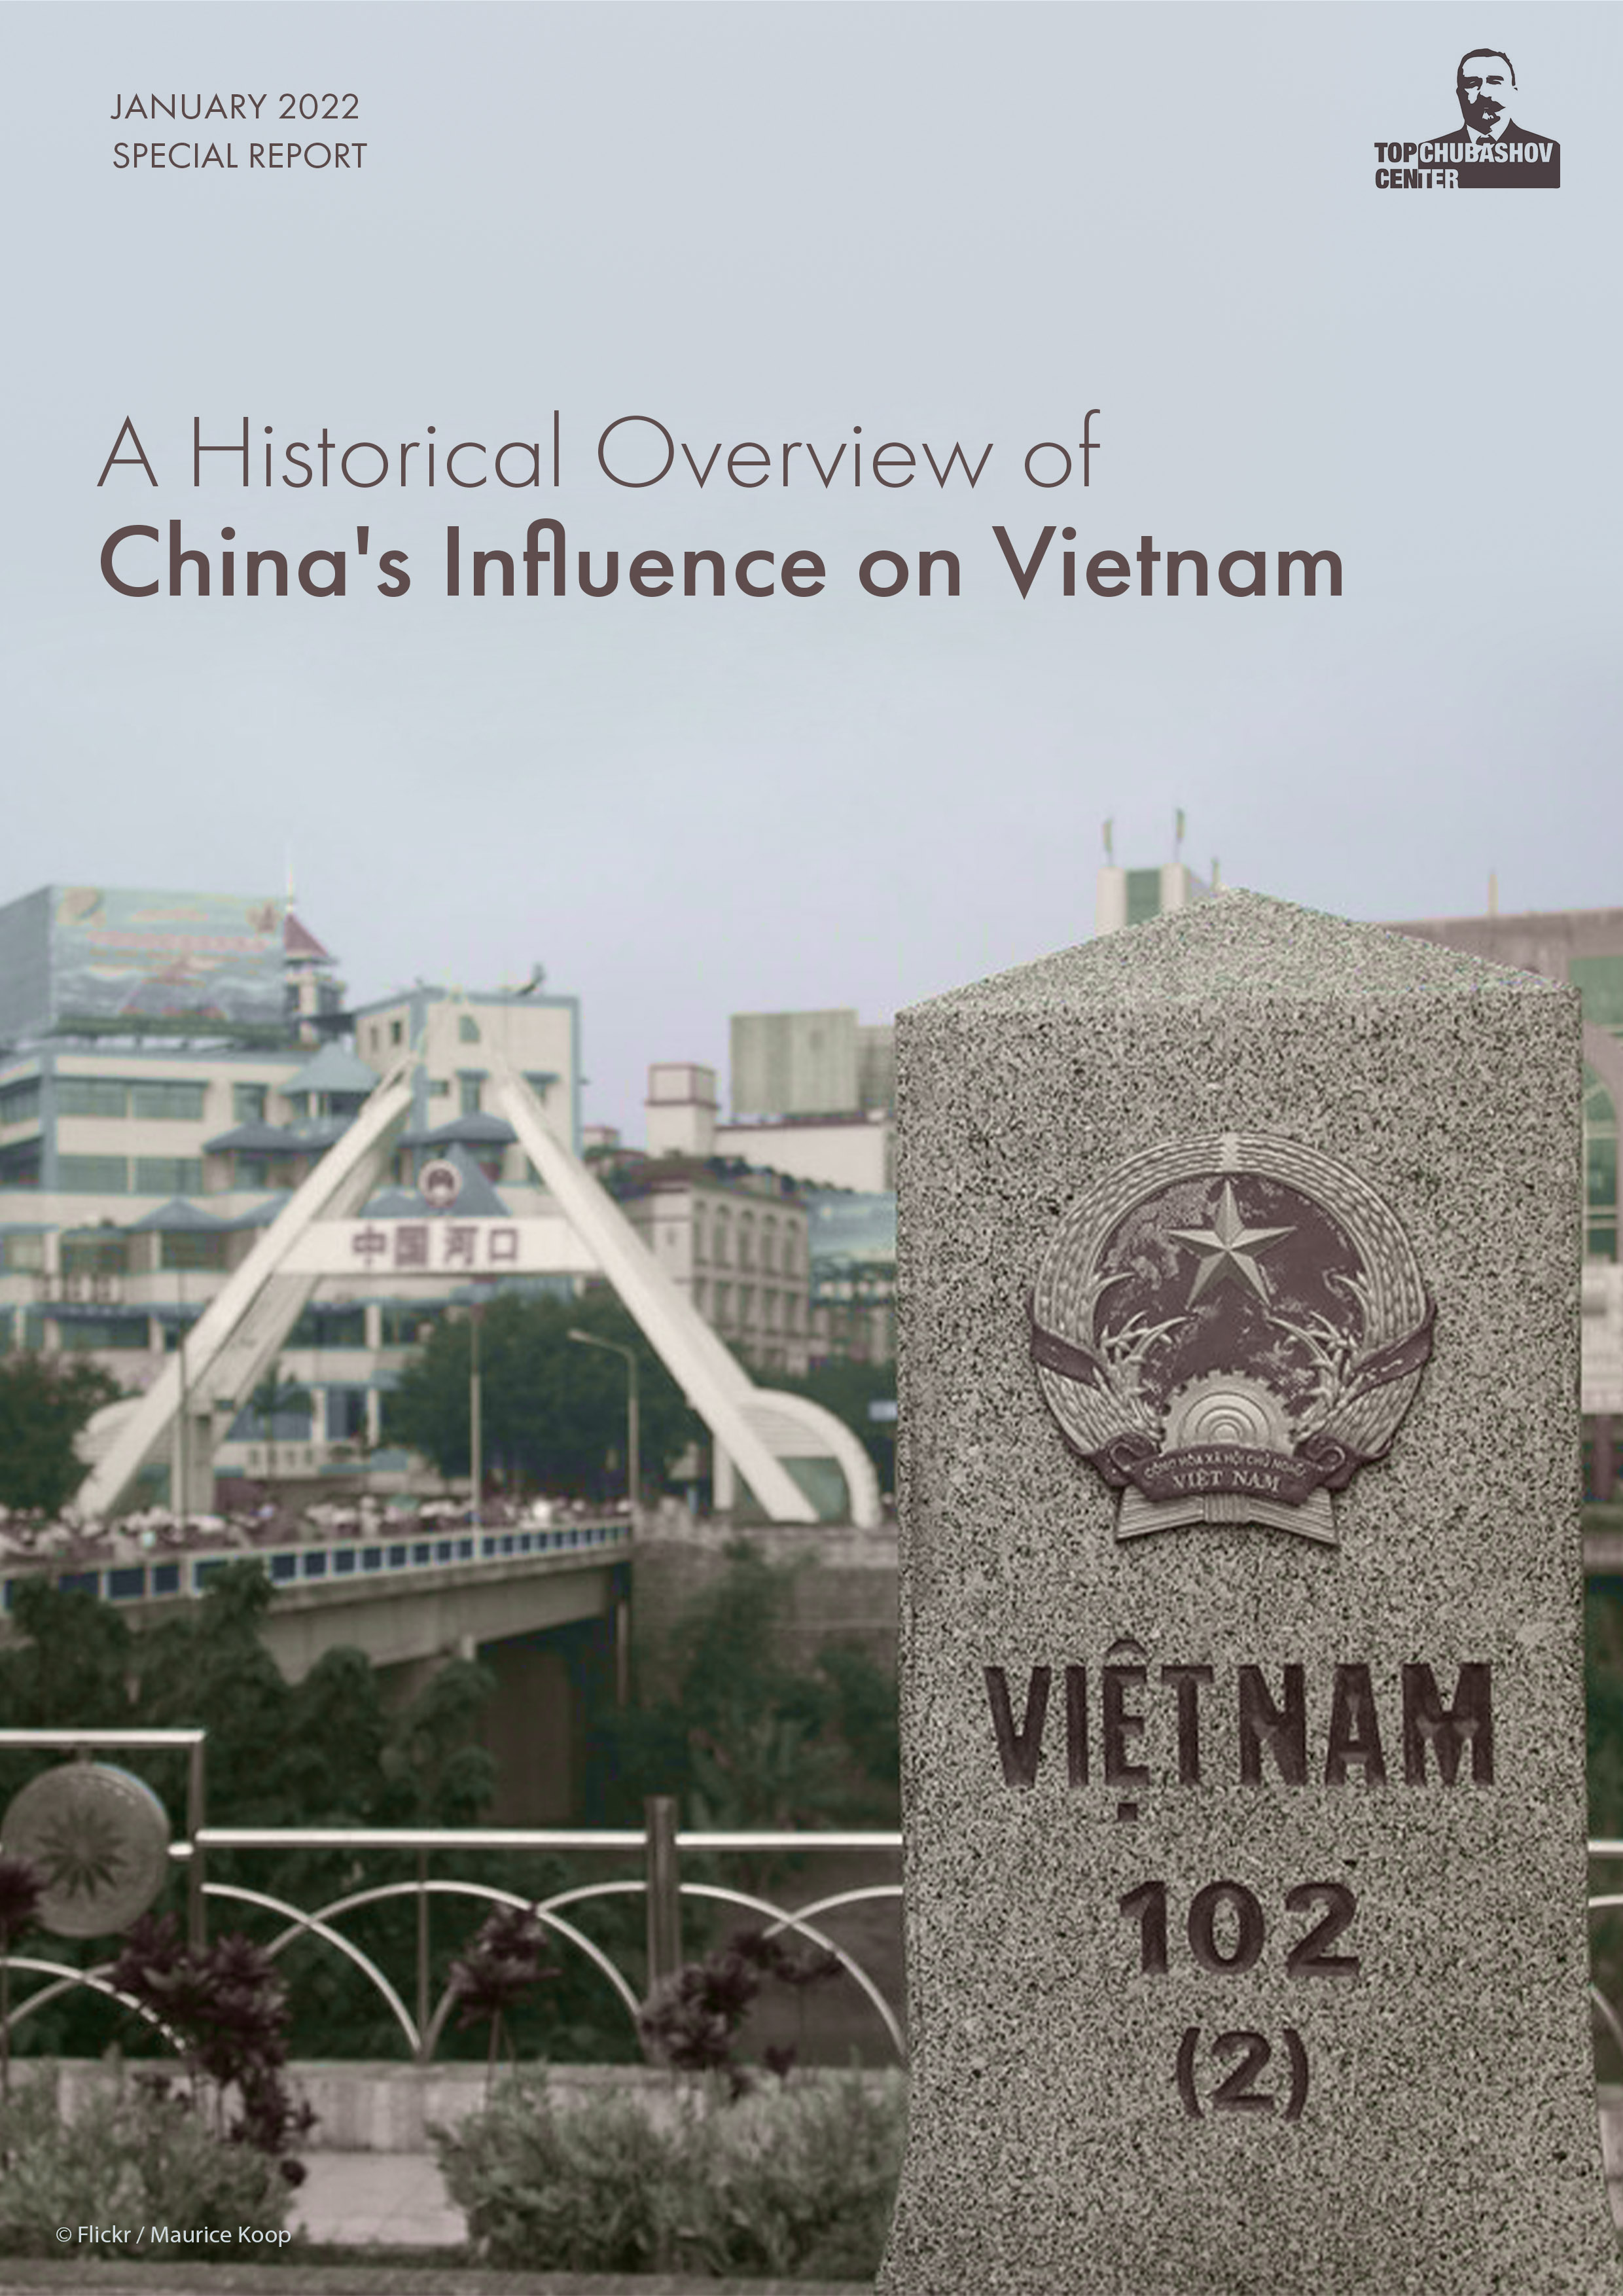 A Historical Overview of China's Influence on Vietnam